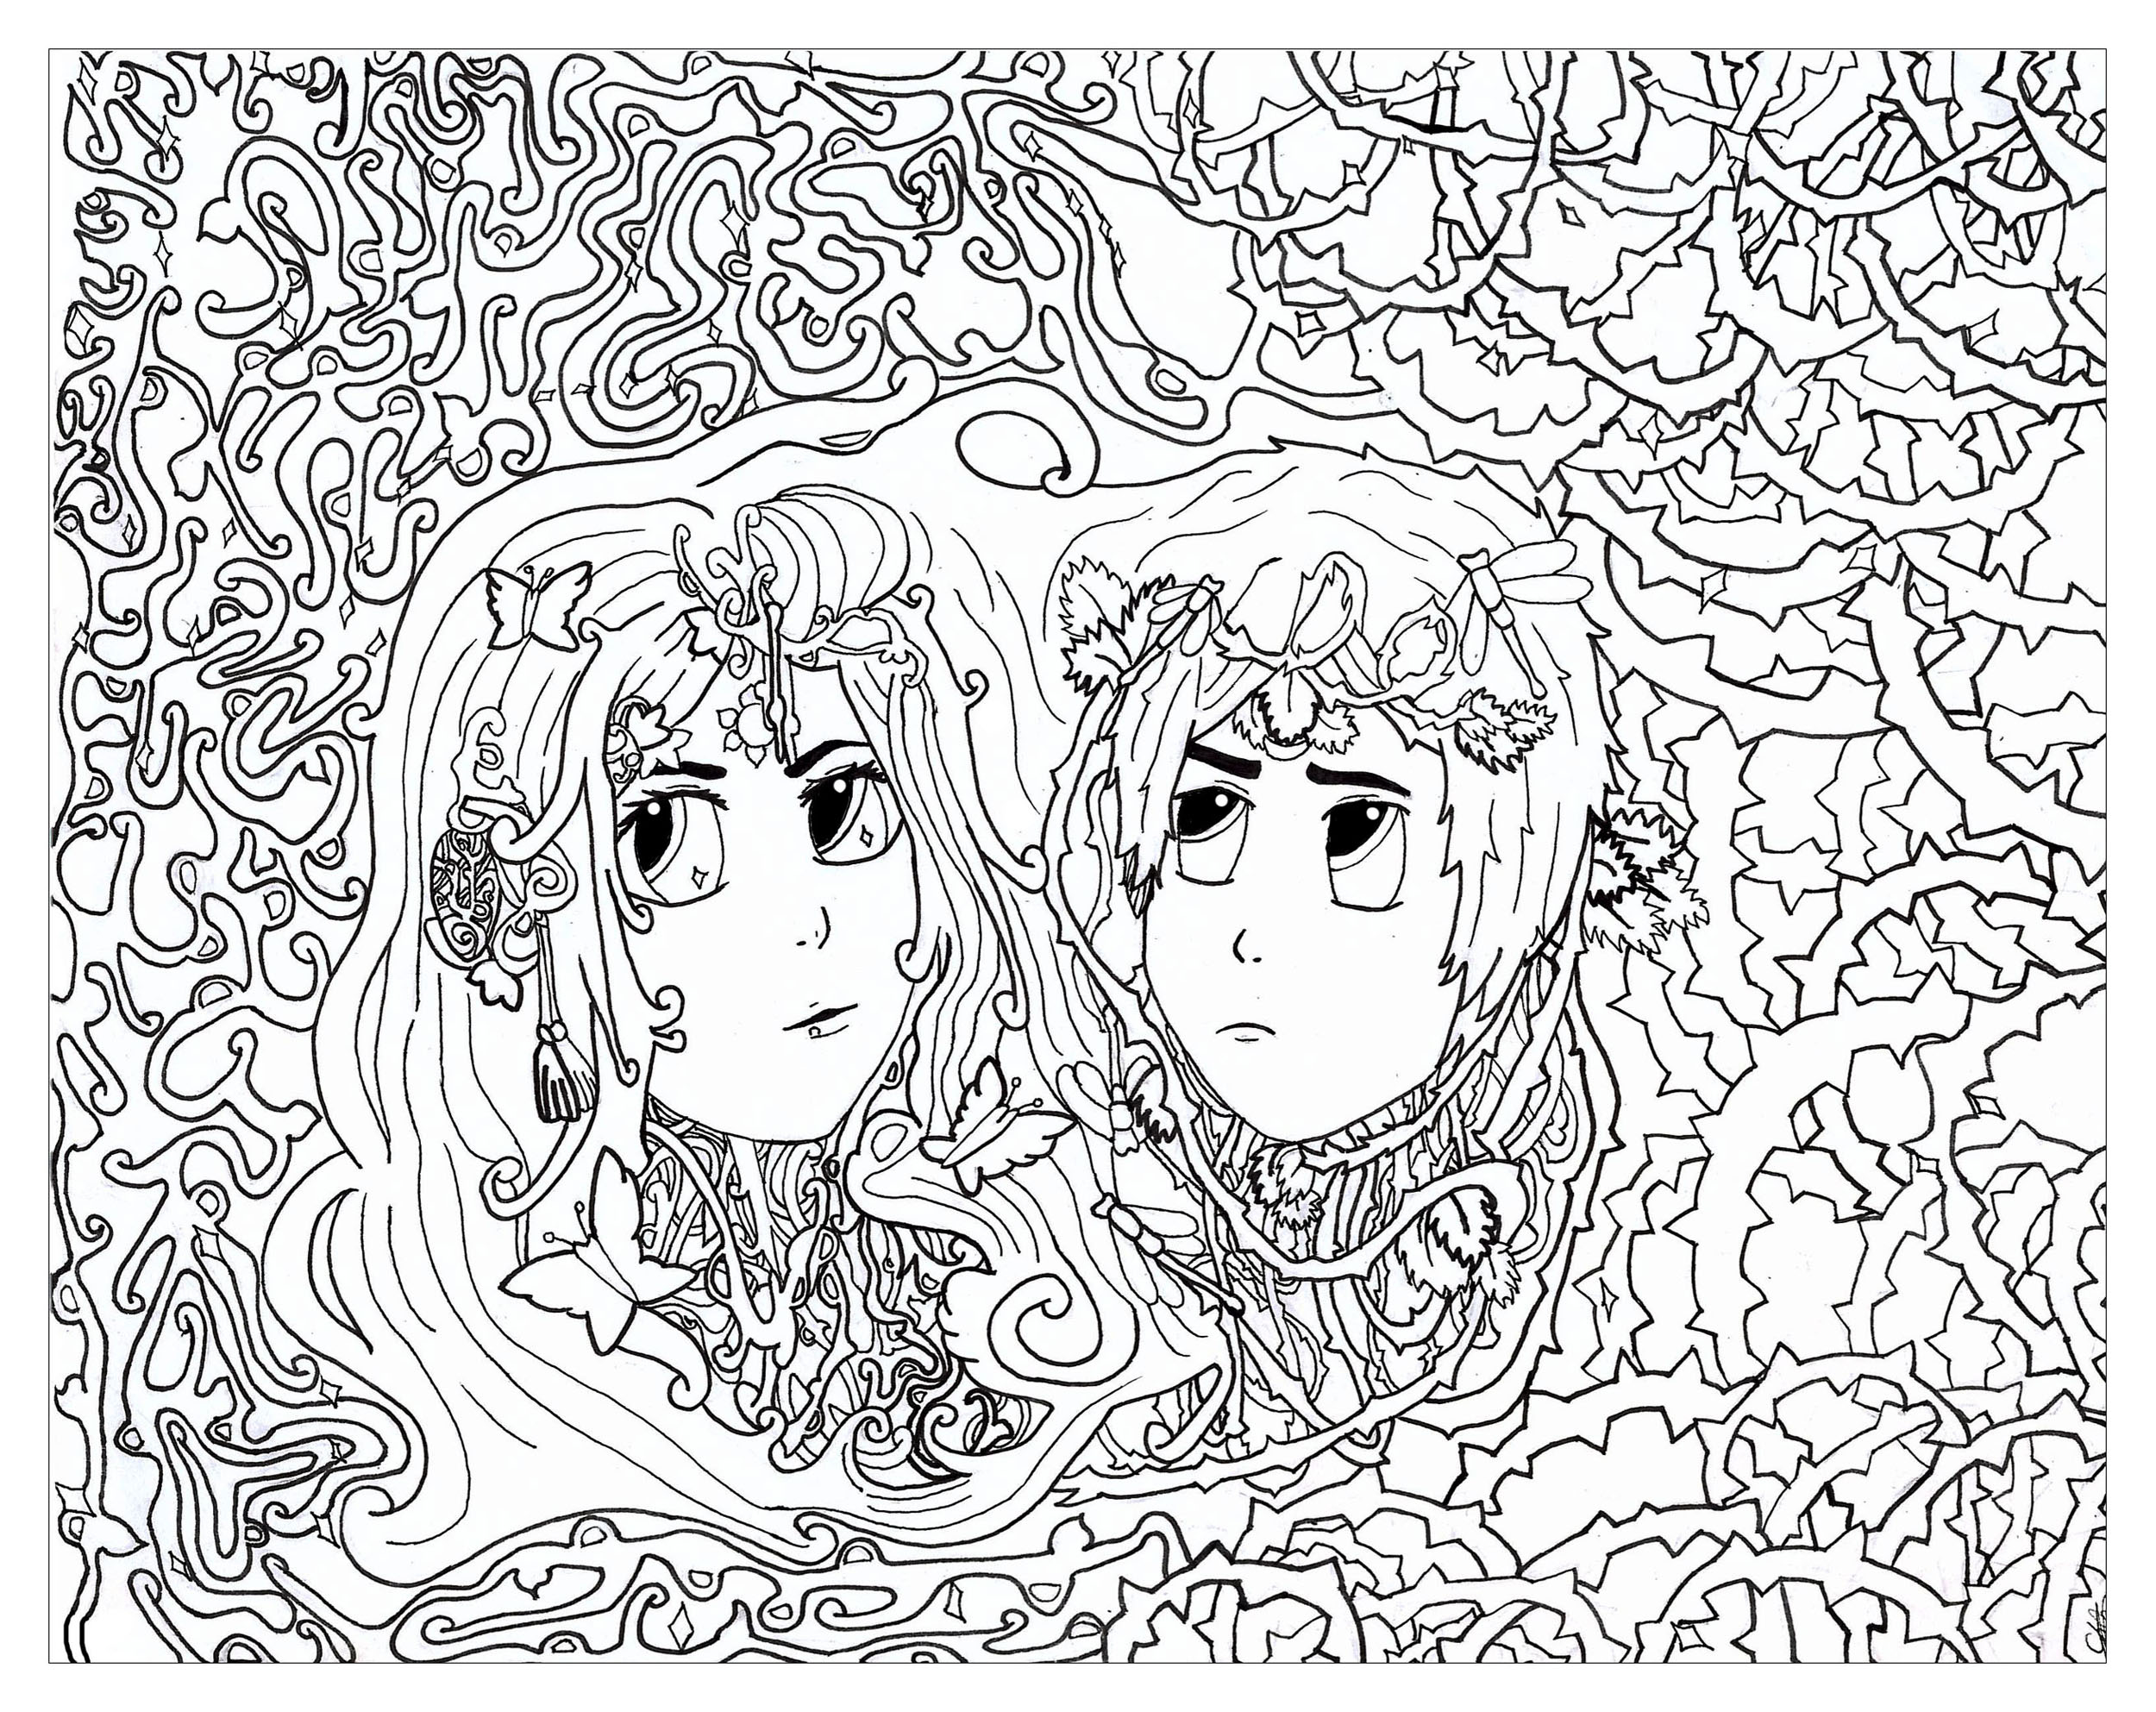 Gemini - Anti stress Adult Coloring Pages